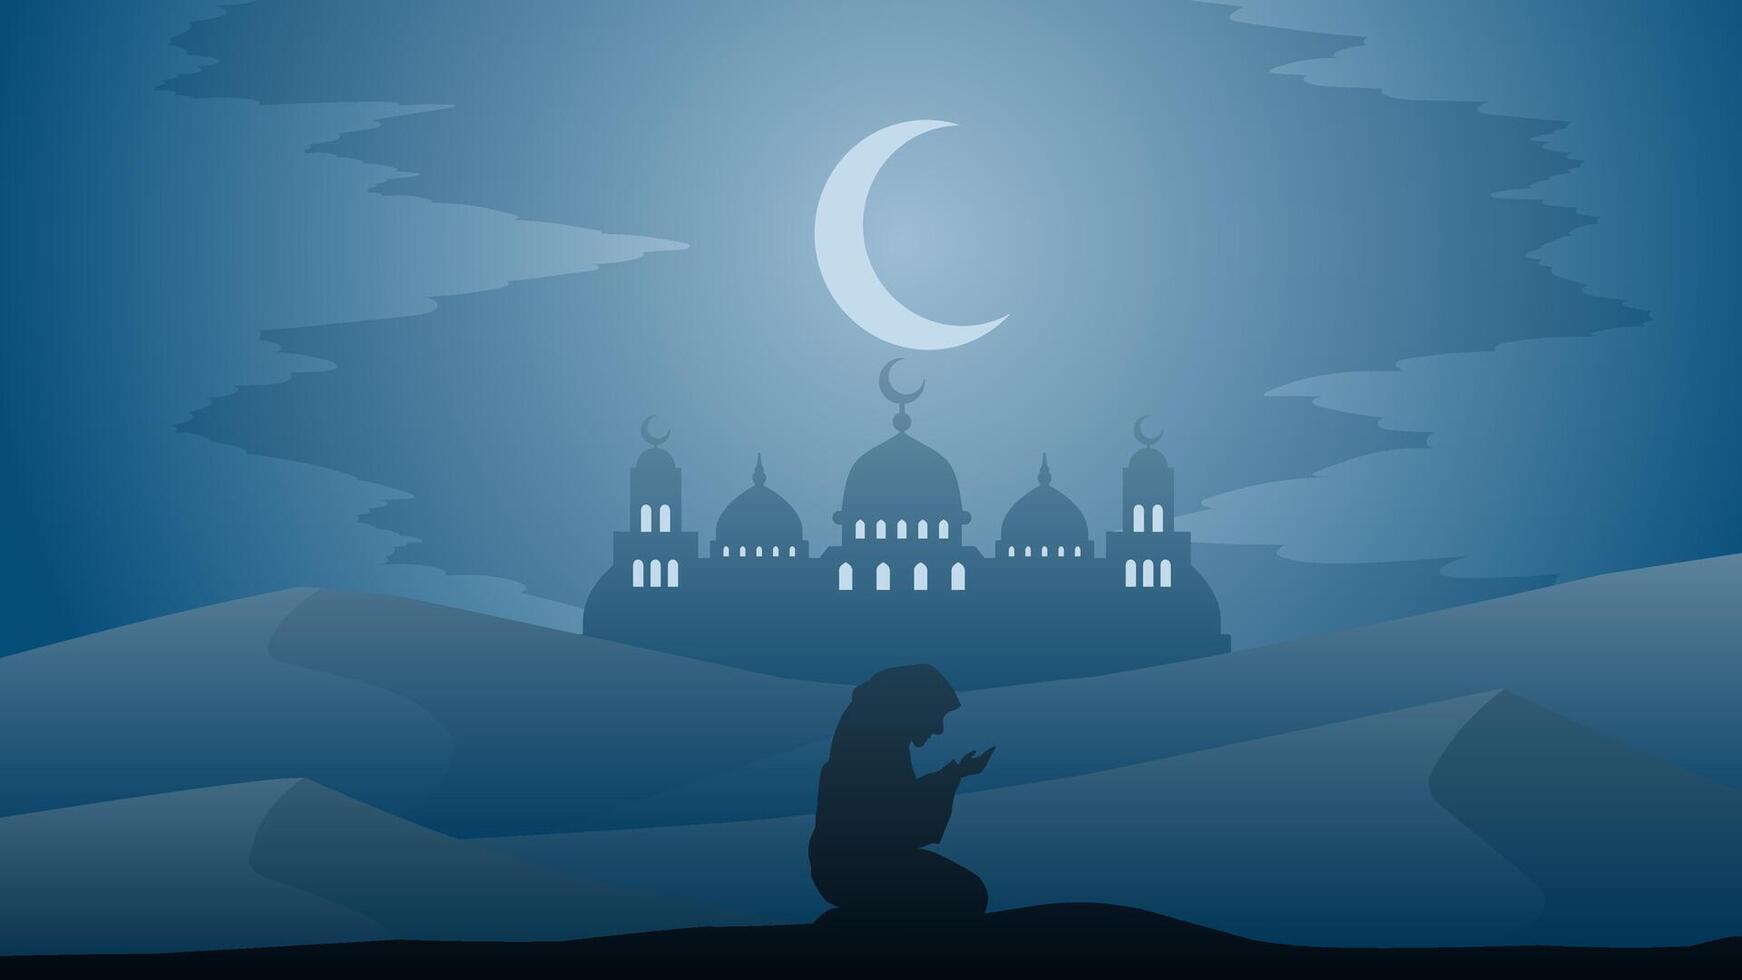 Ramadan landscape vector illustration. Mosque silhouette at night with praying muslim in desert. Mosque landscape for illustration, background or ramadan. Eid mubarak landscape for ramadan event